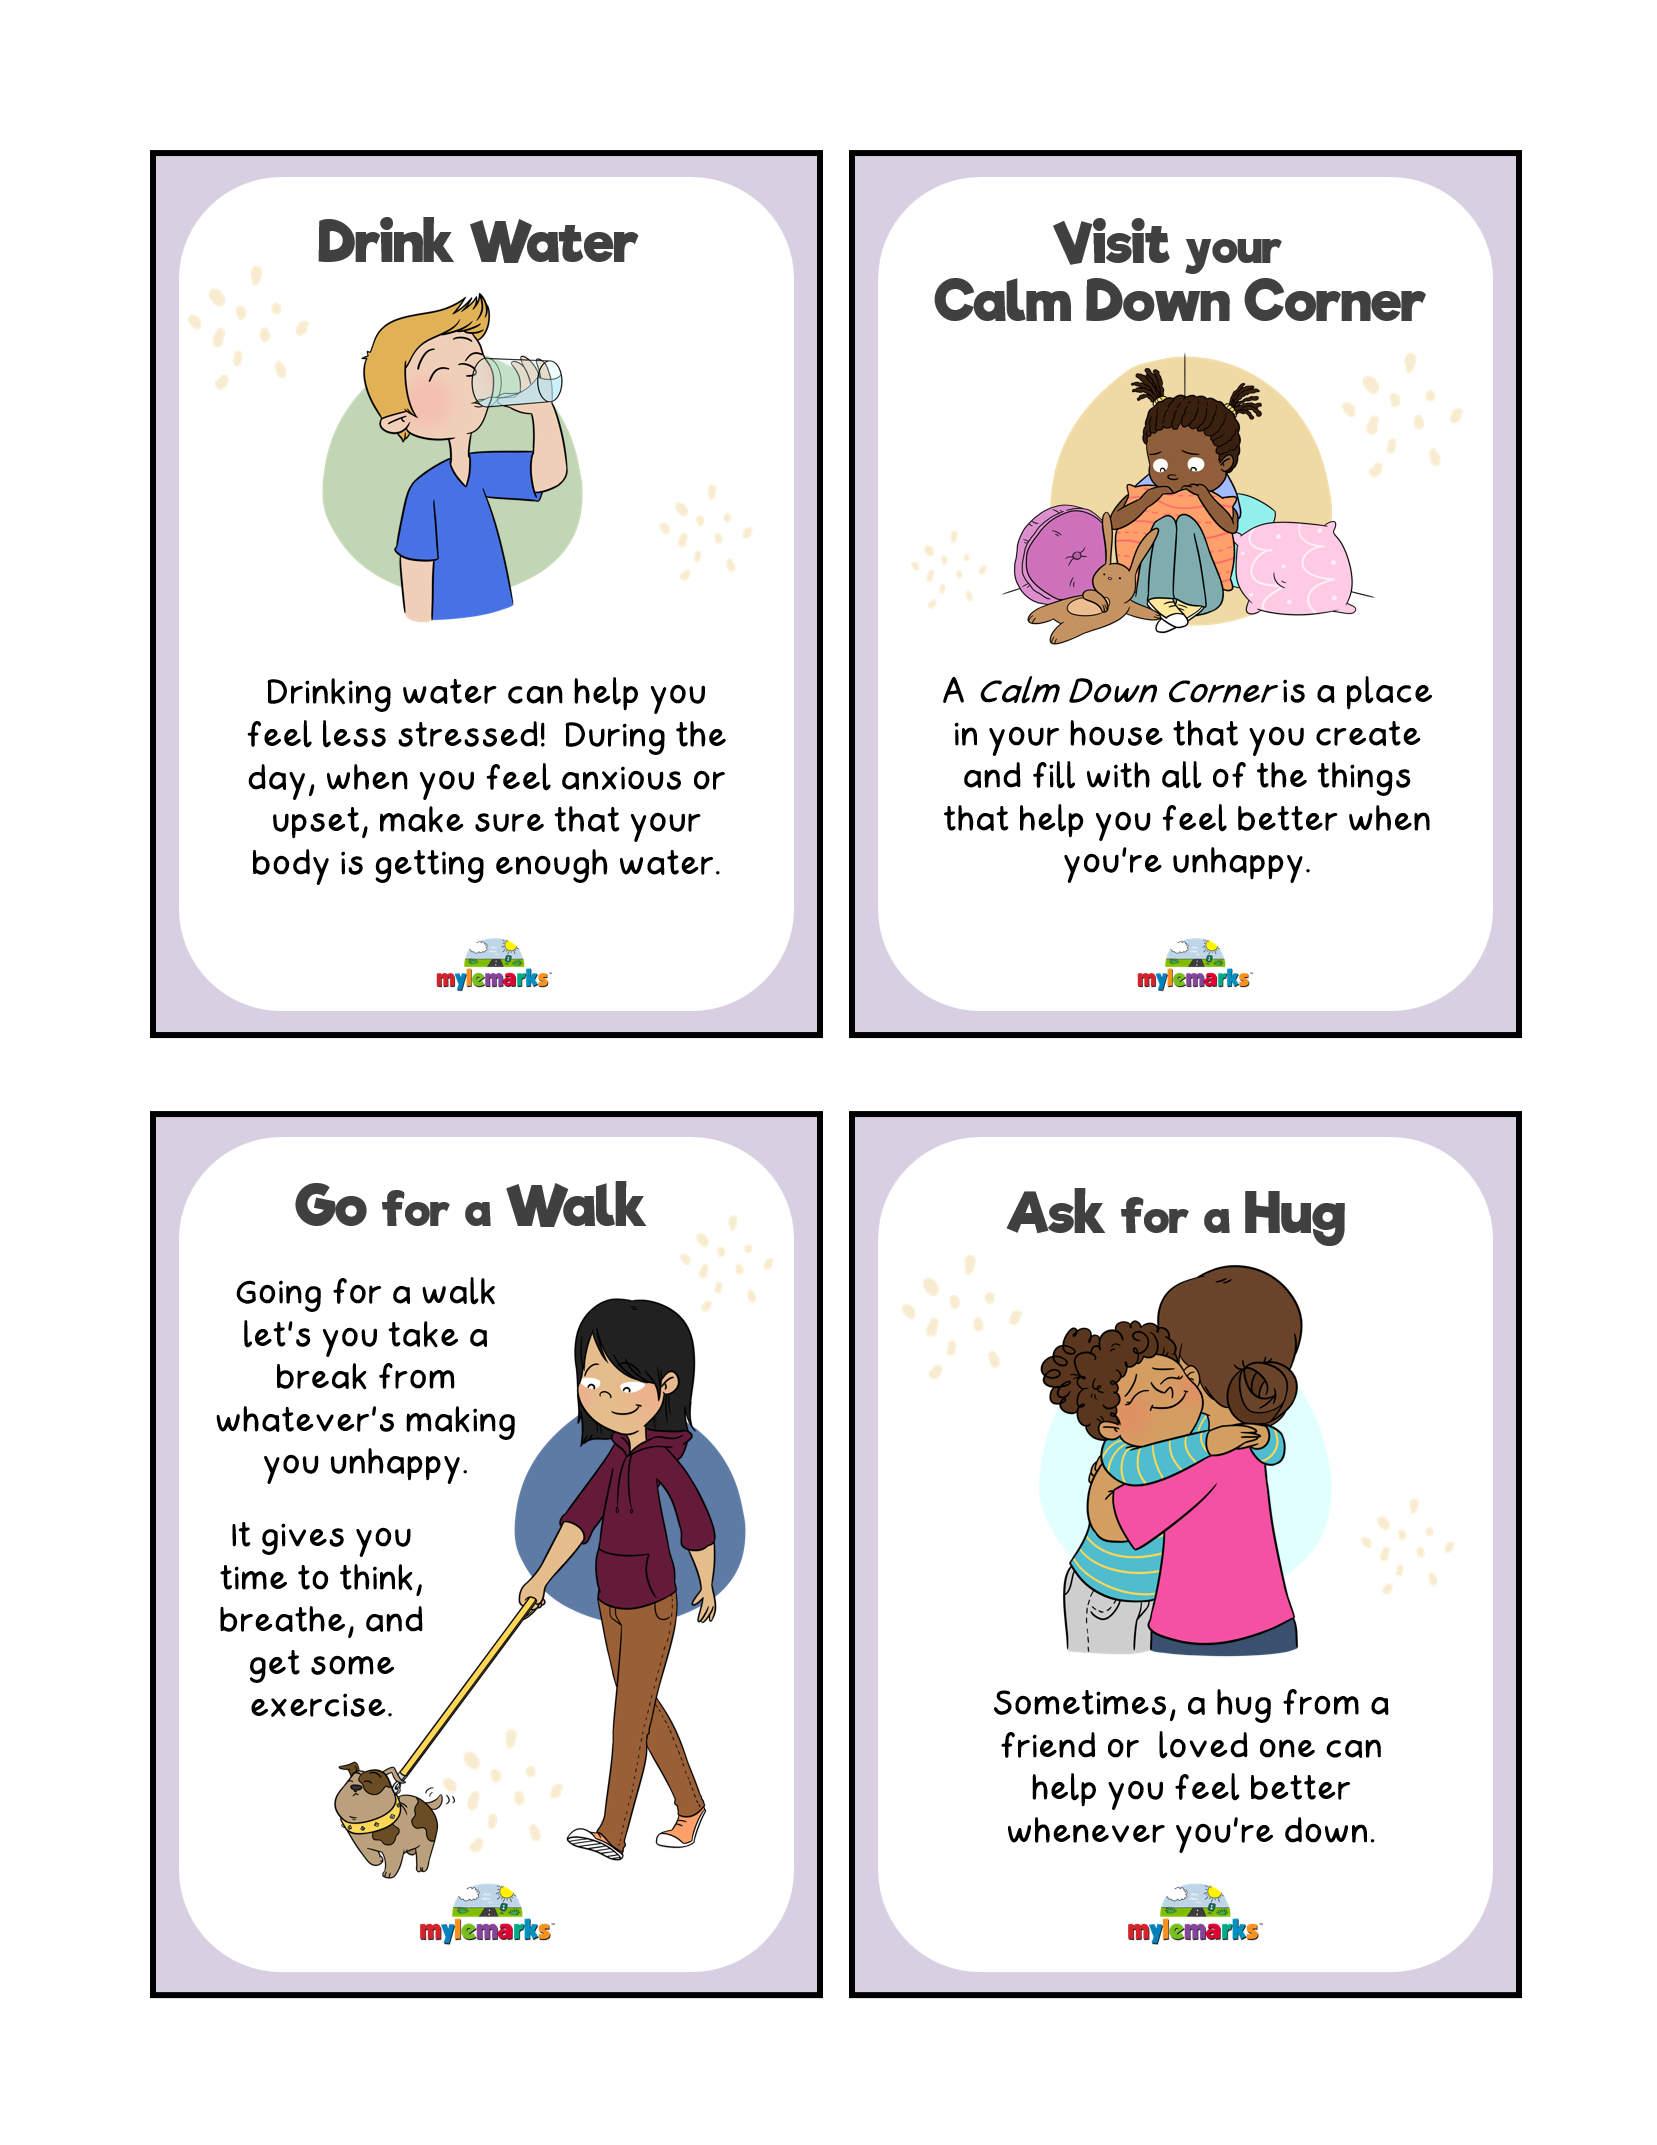 coping-skills-cards-poster-printable